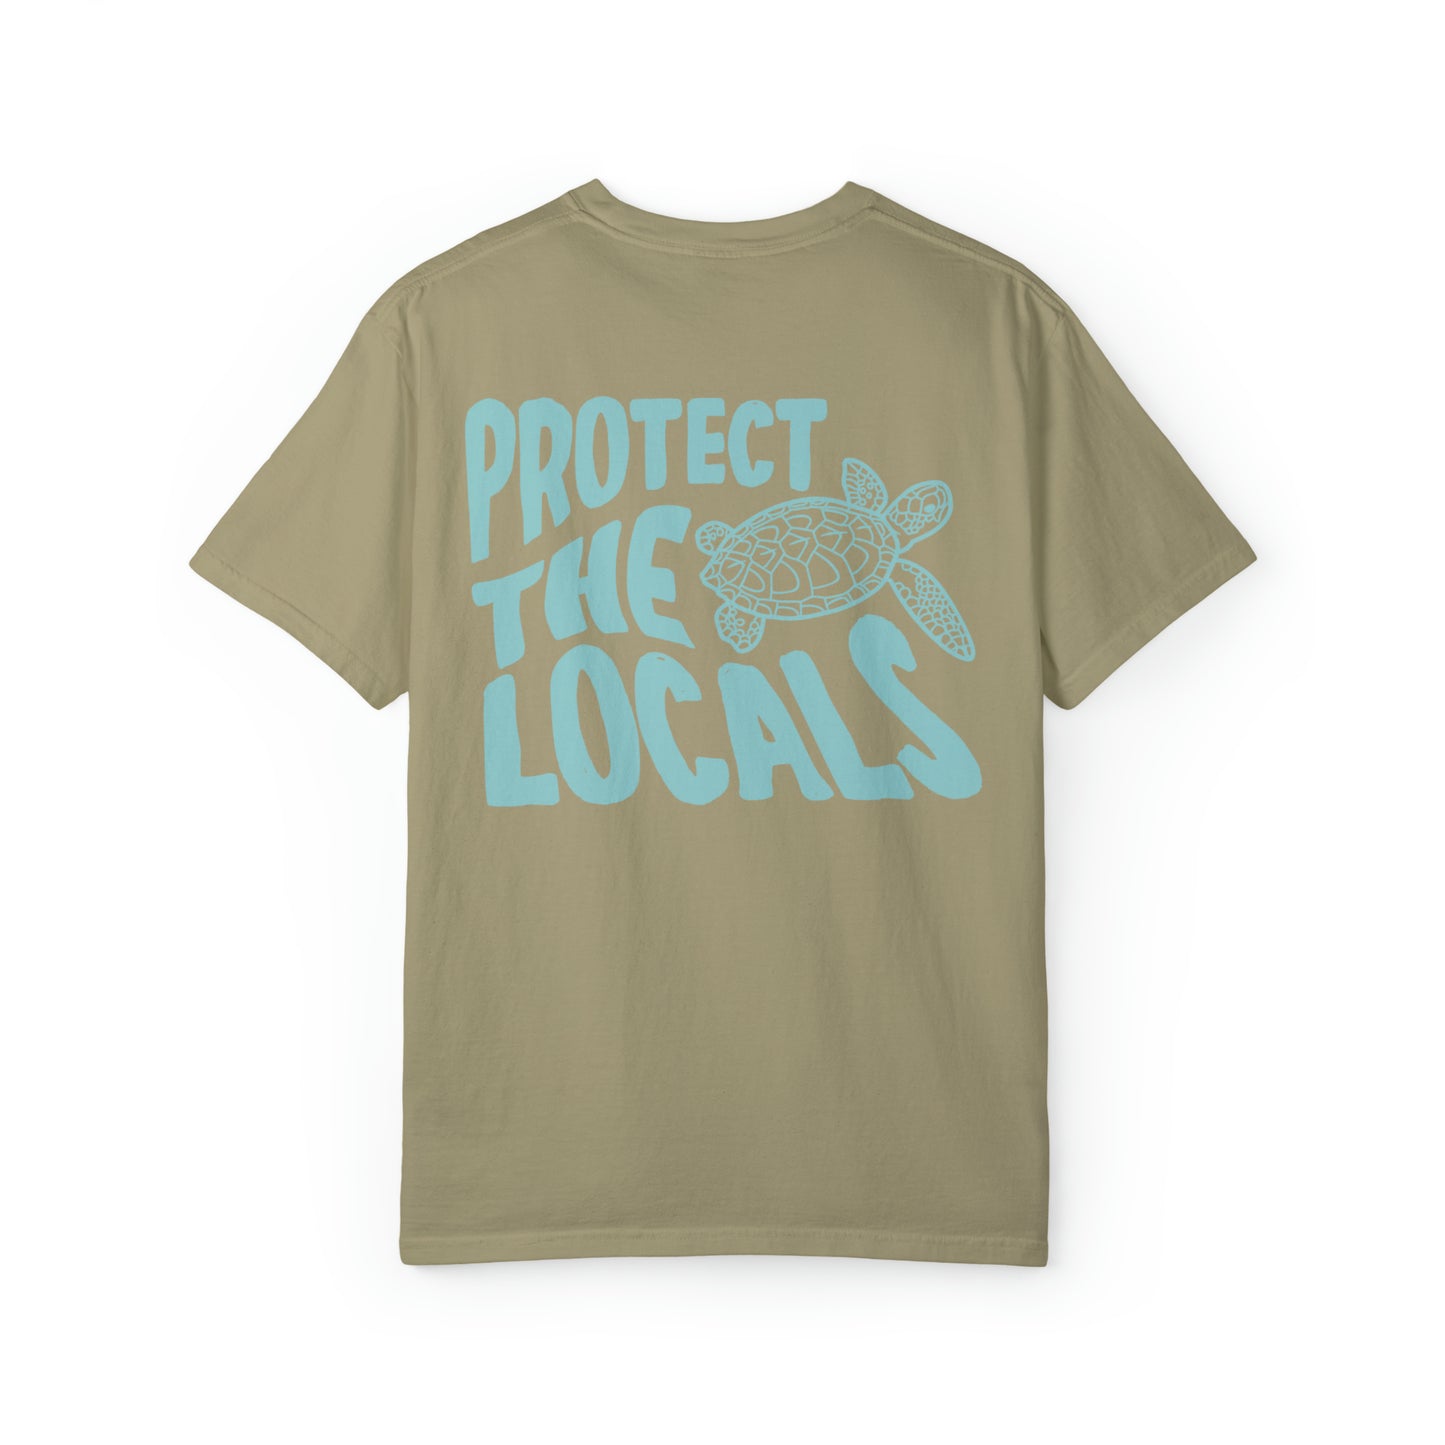 COMFORT COLORS Protect The Locals Sea Turtle Shirt - Fractalista Designs